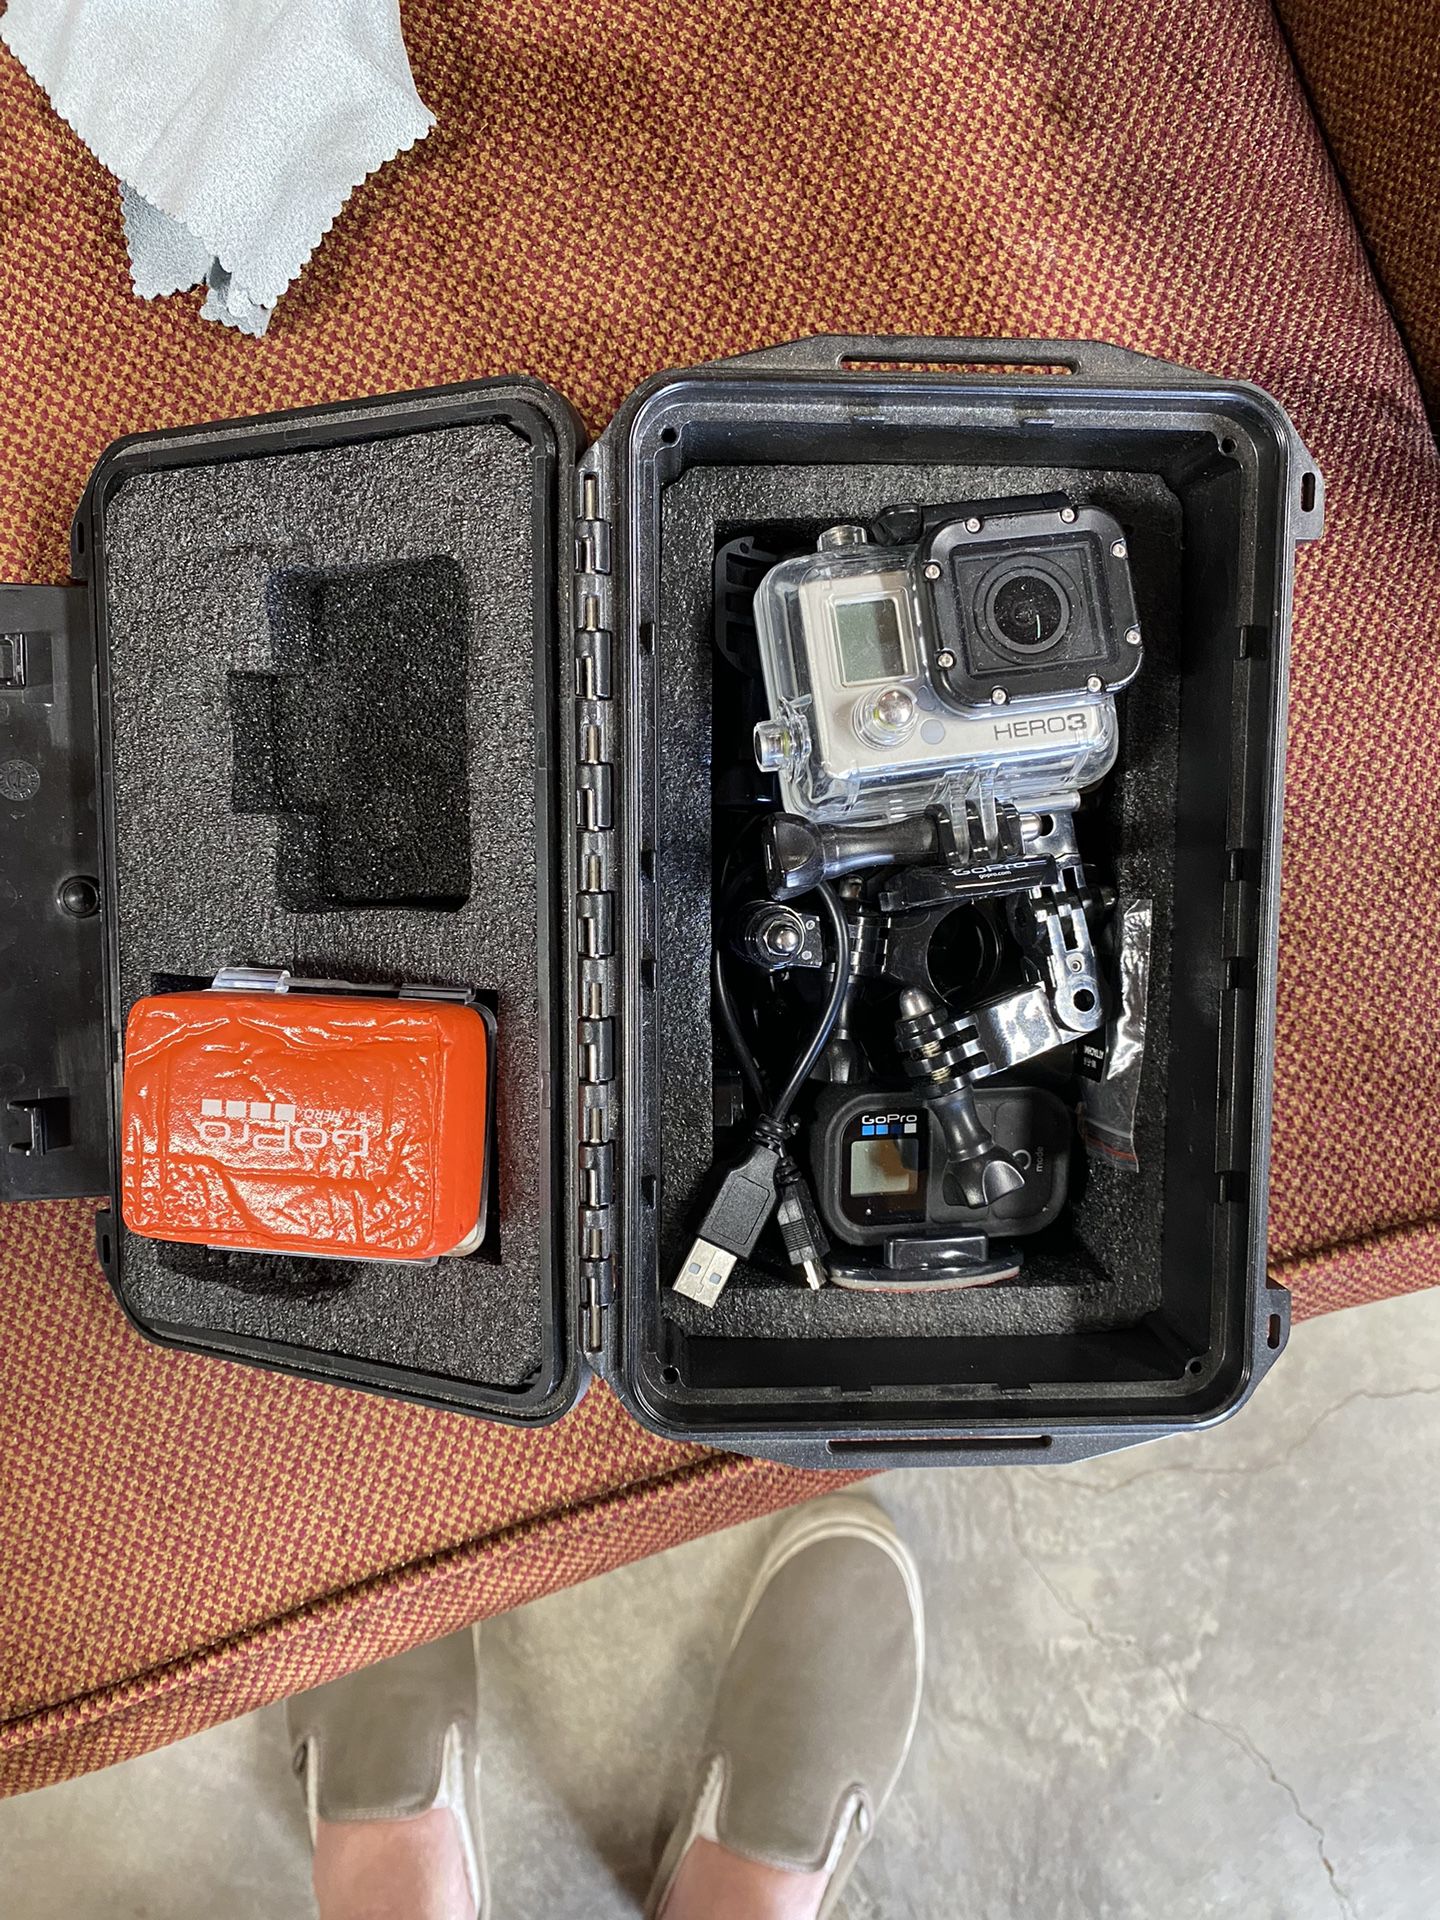 GoPro Cameras And Gear